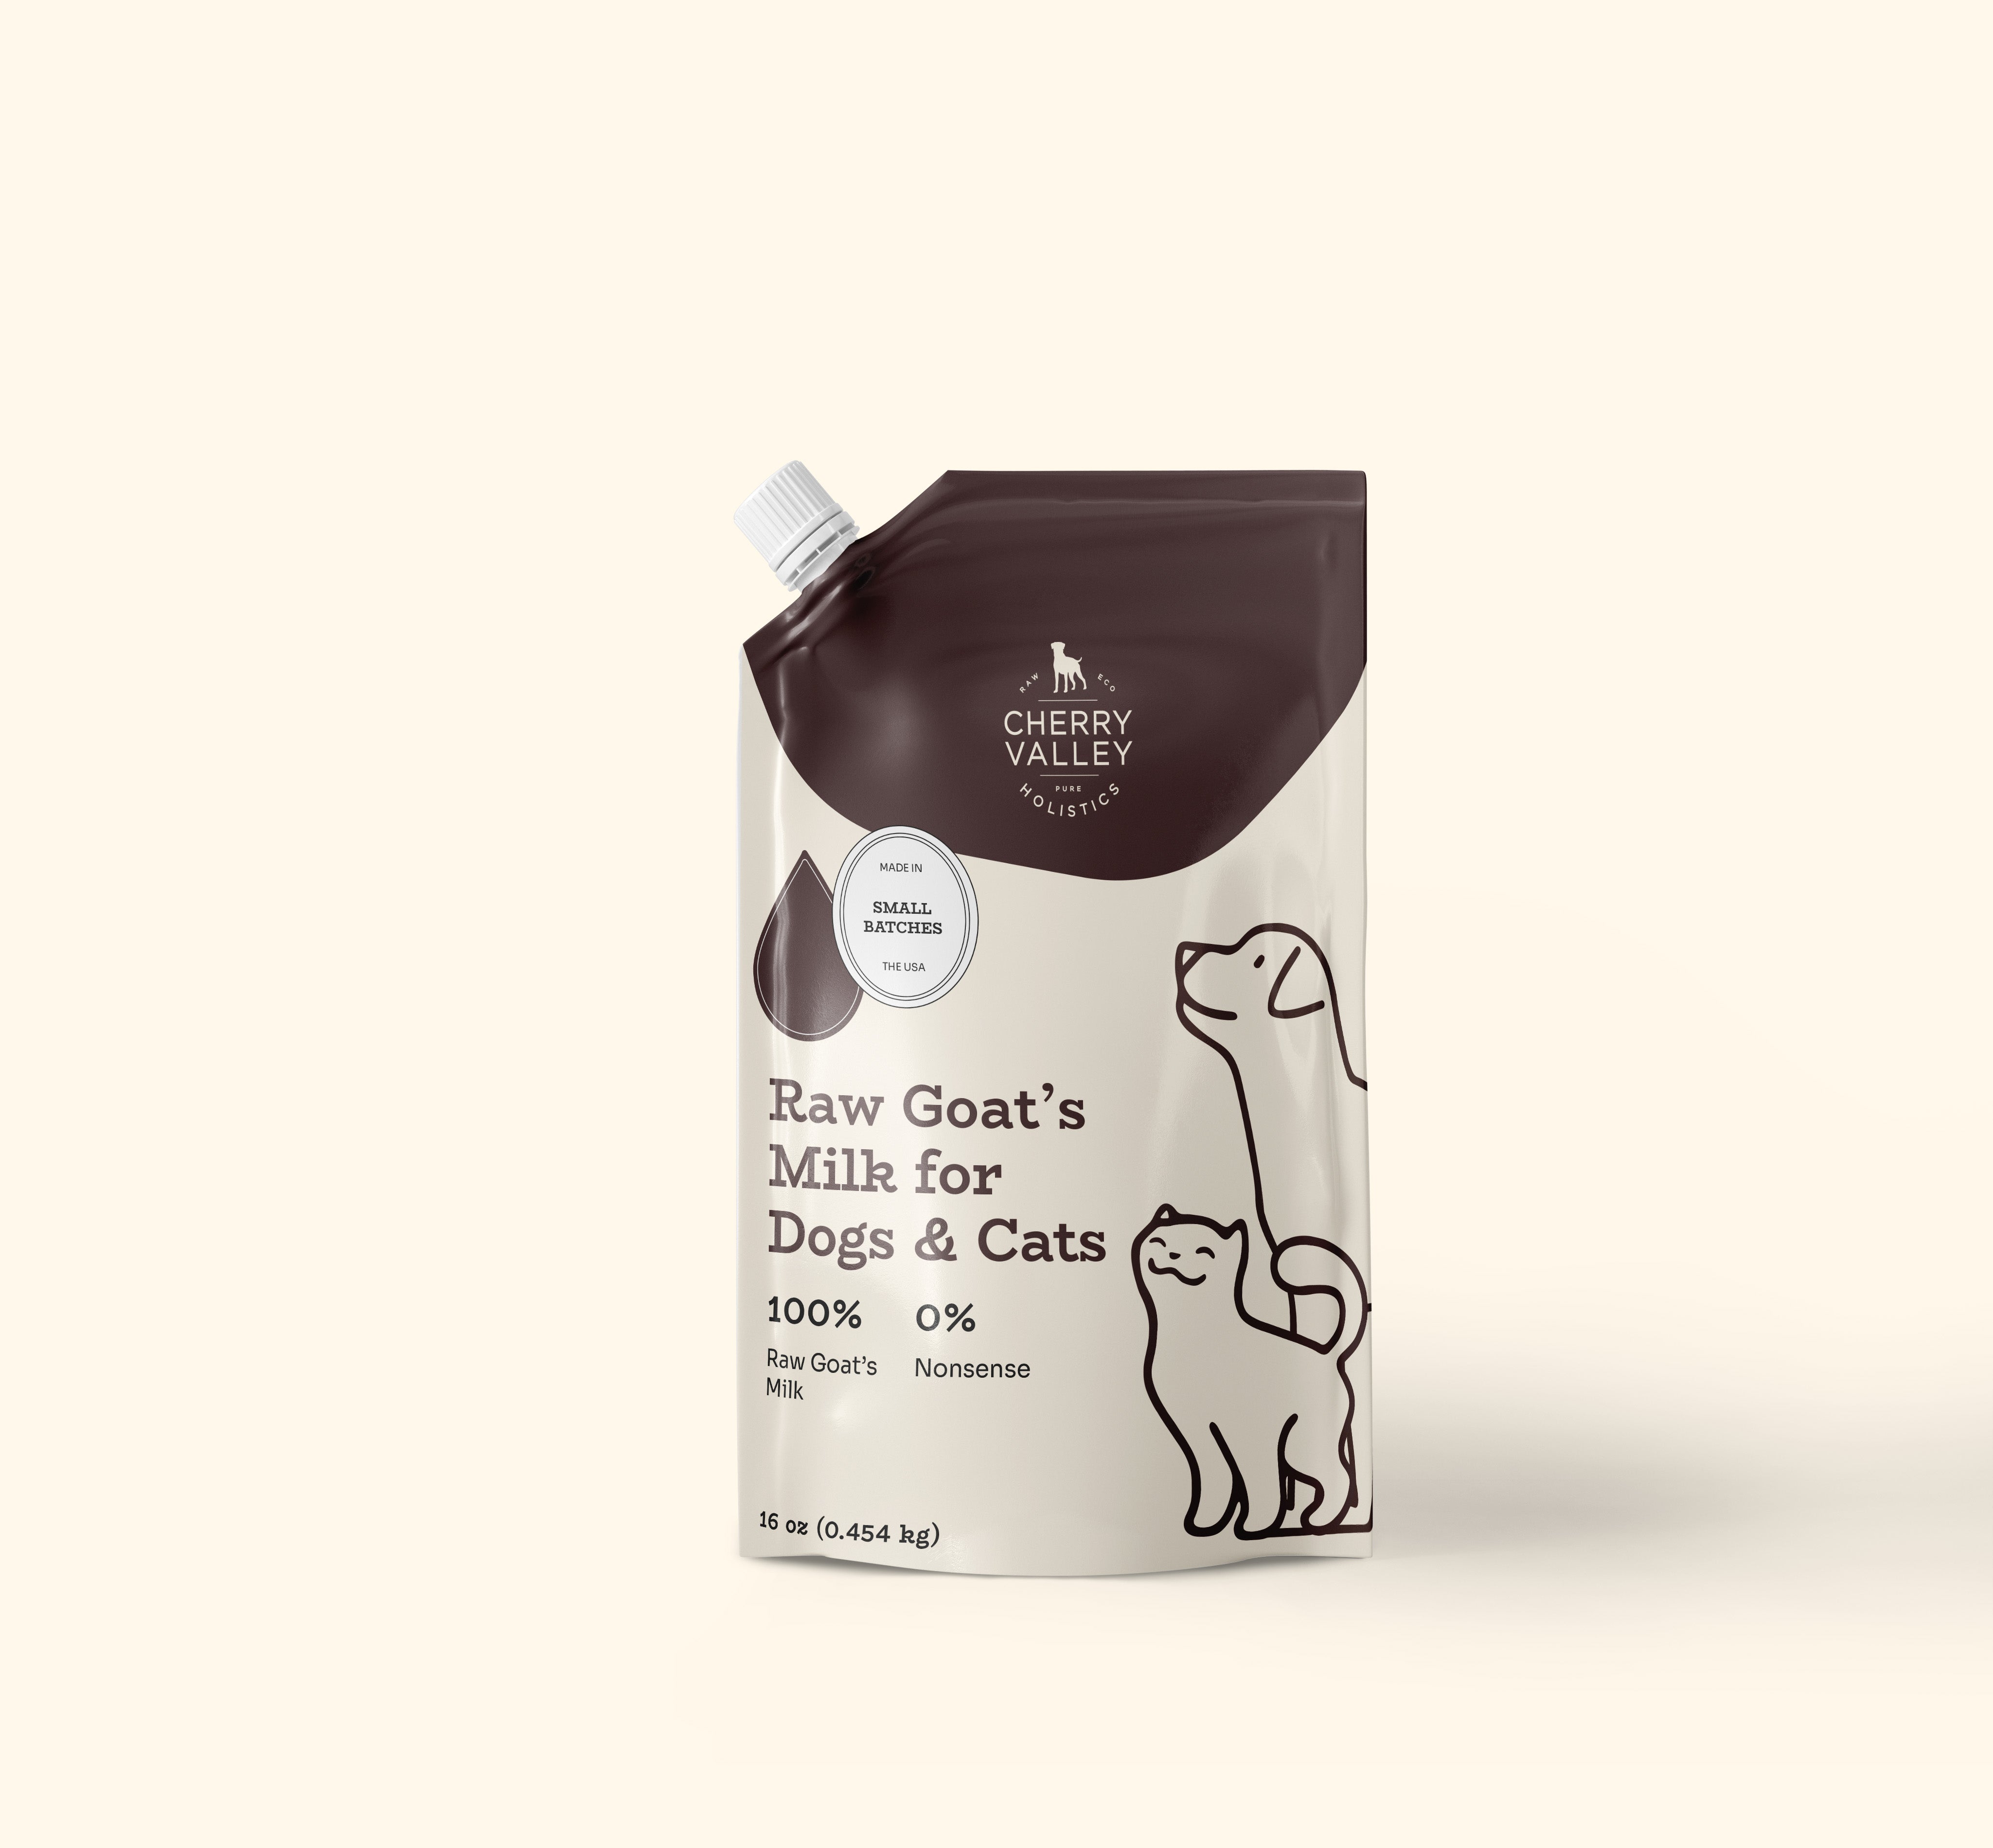 Raw Goat's Milk for Dogs & Cats